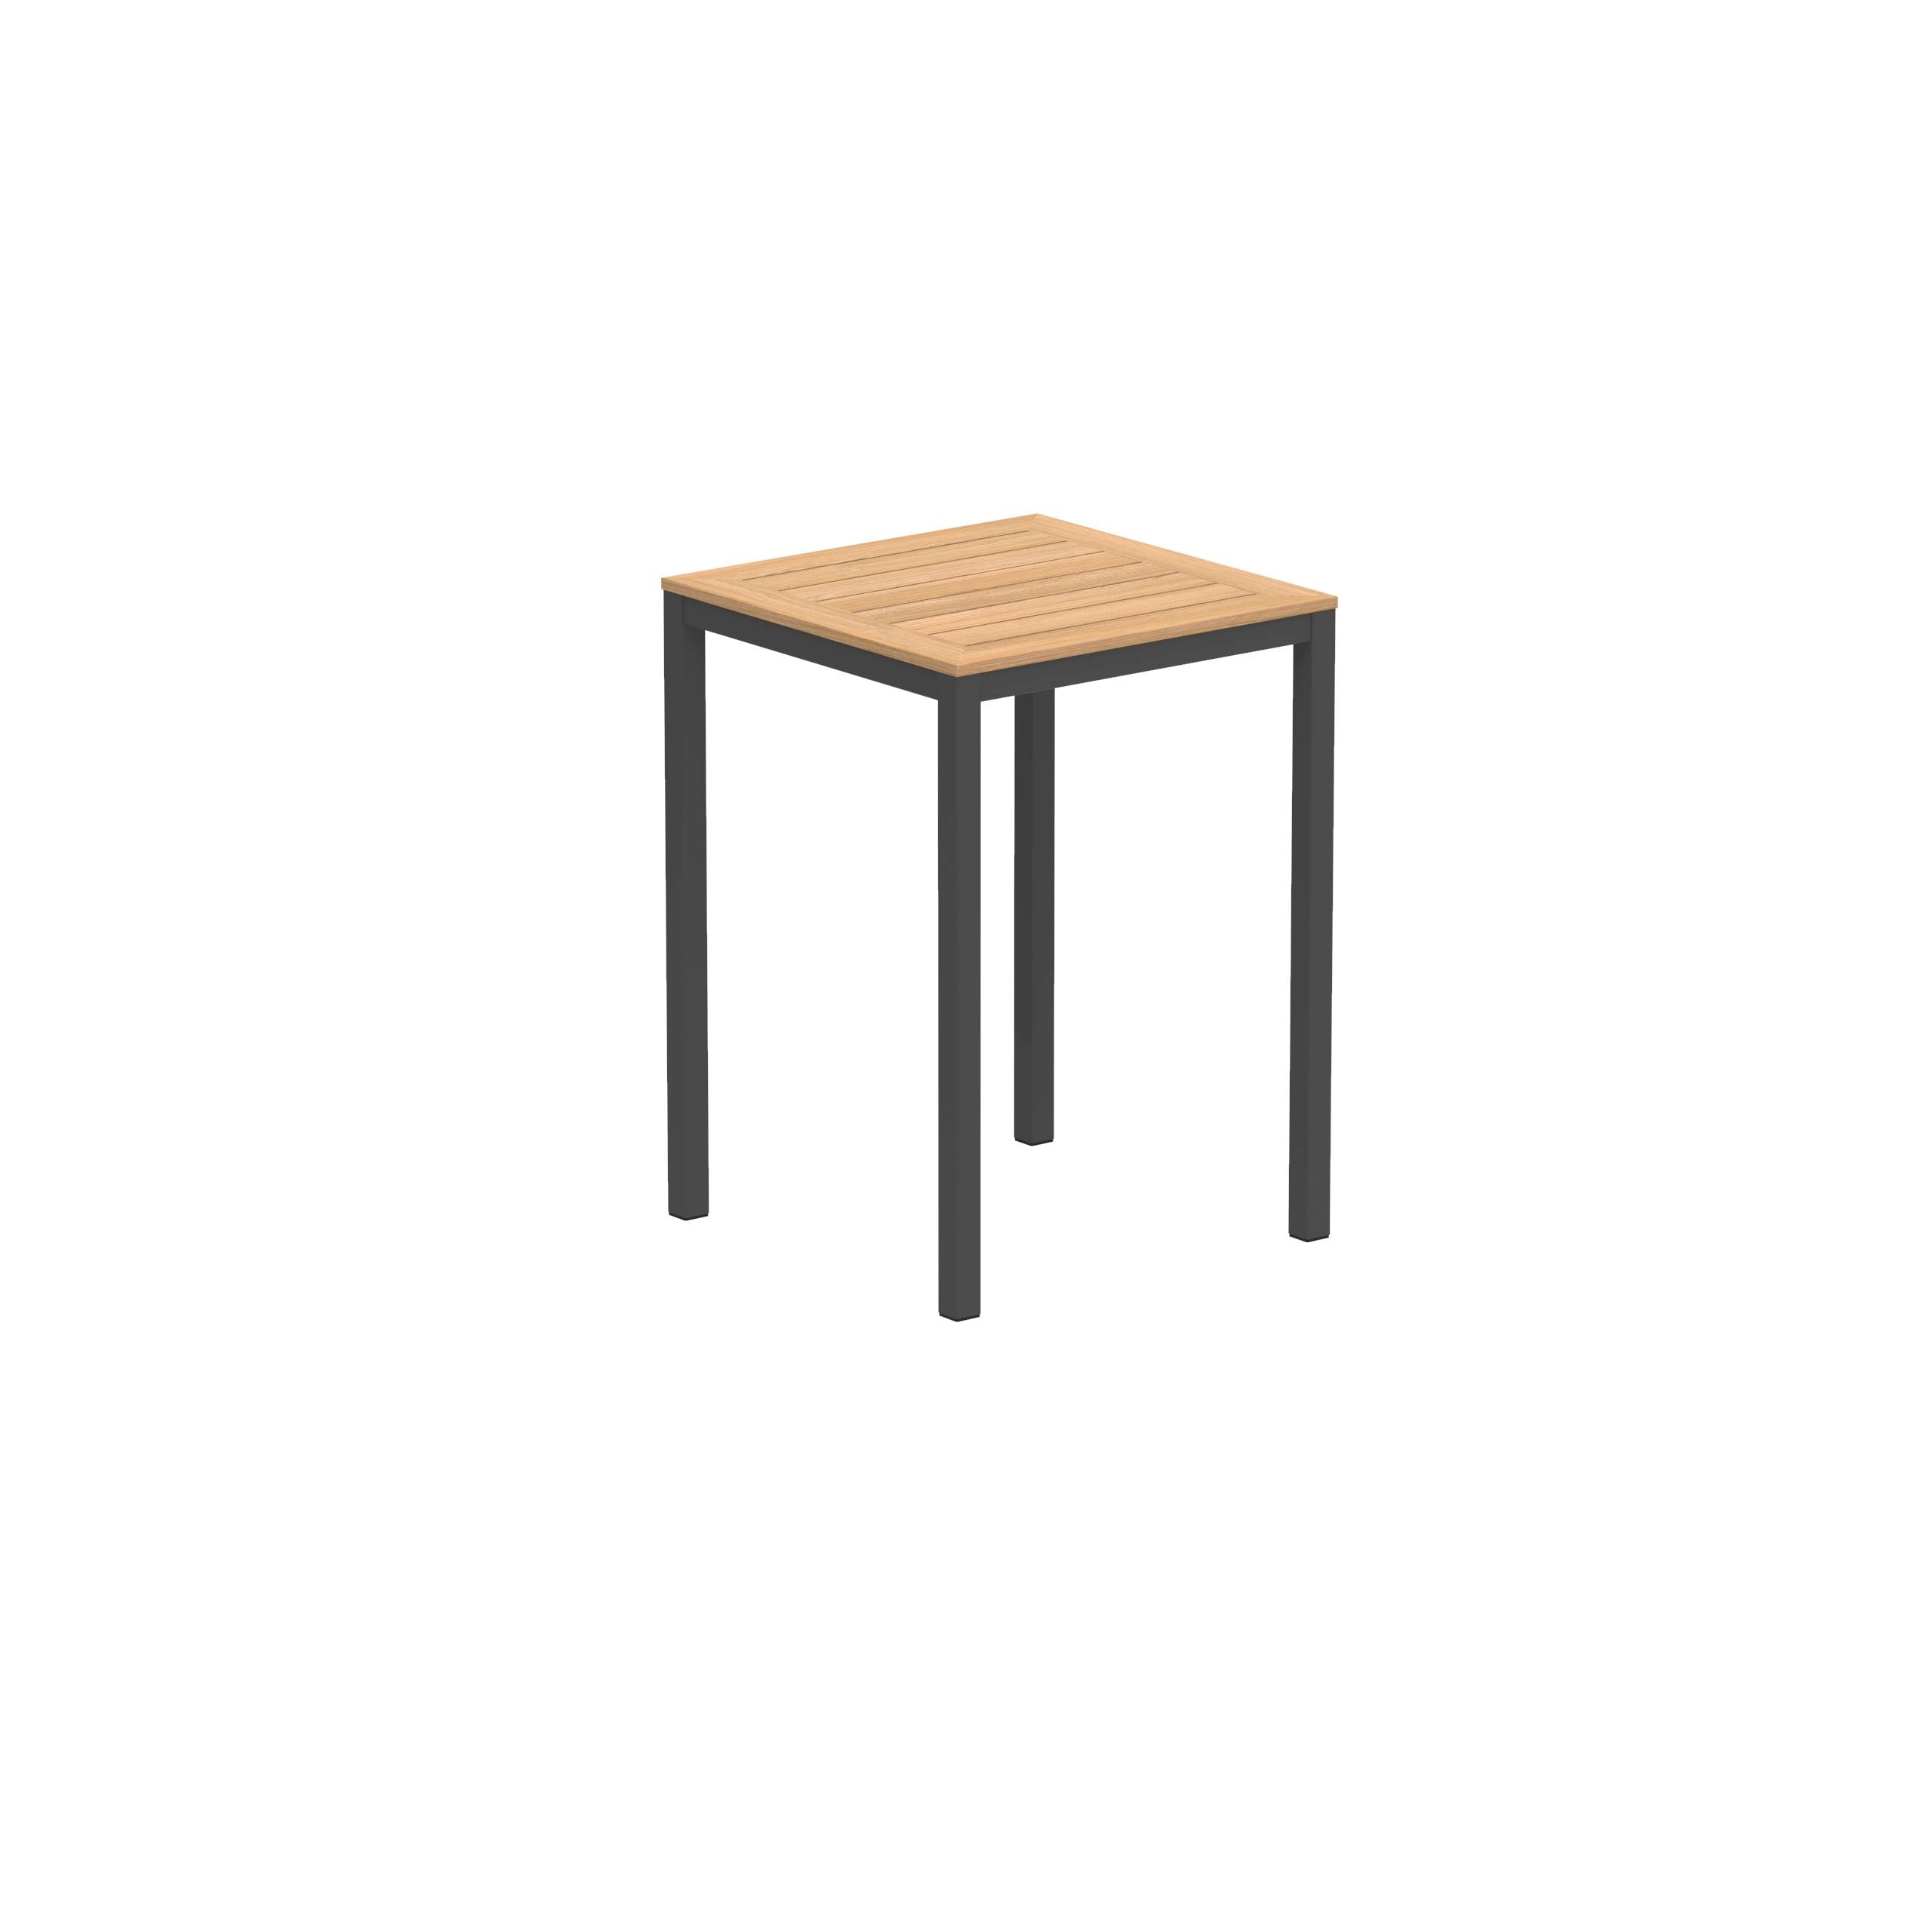 Taboela High Table 80x80cm Anthracite With Teak Tabletop